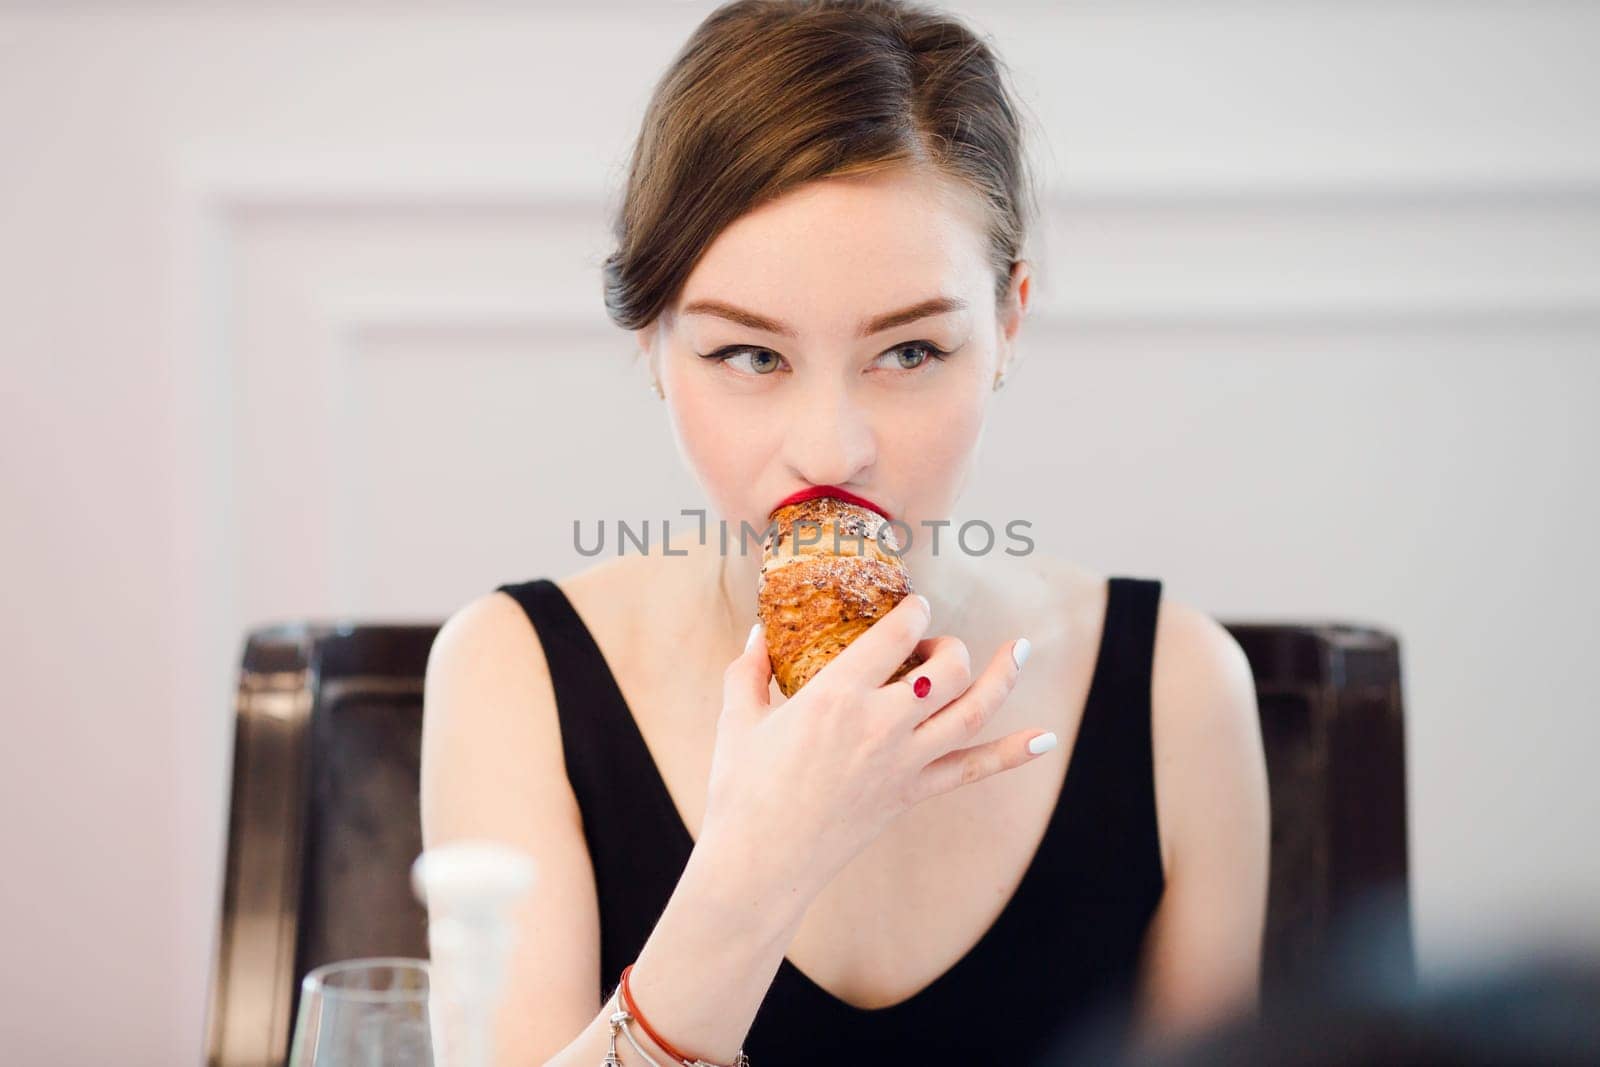 Woman biting in a croissant in a cafe interior by Demkat